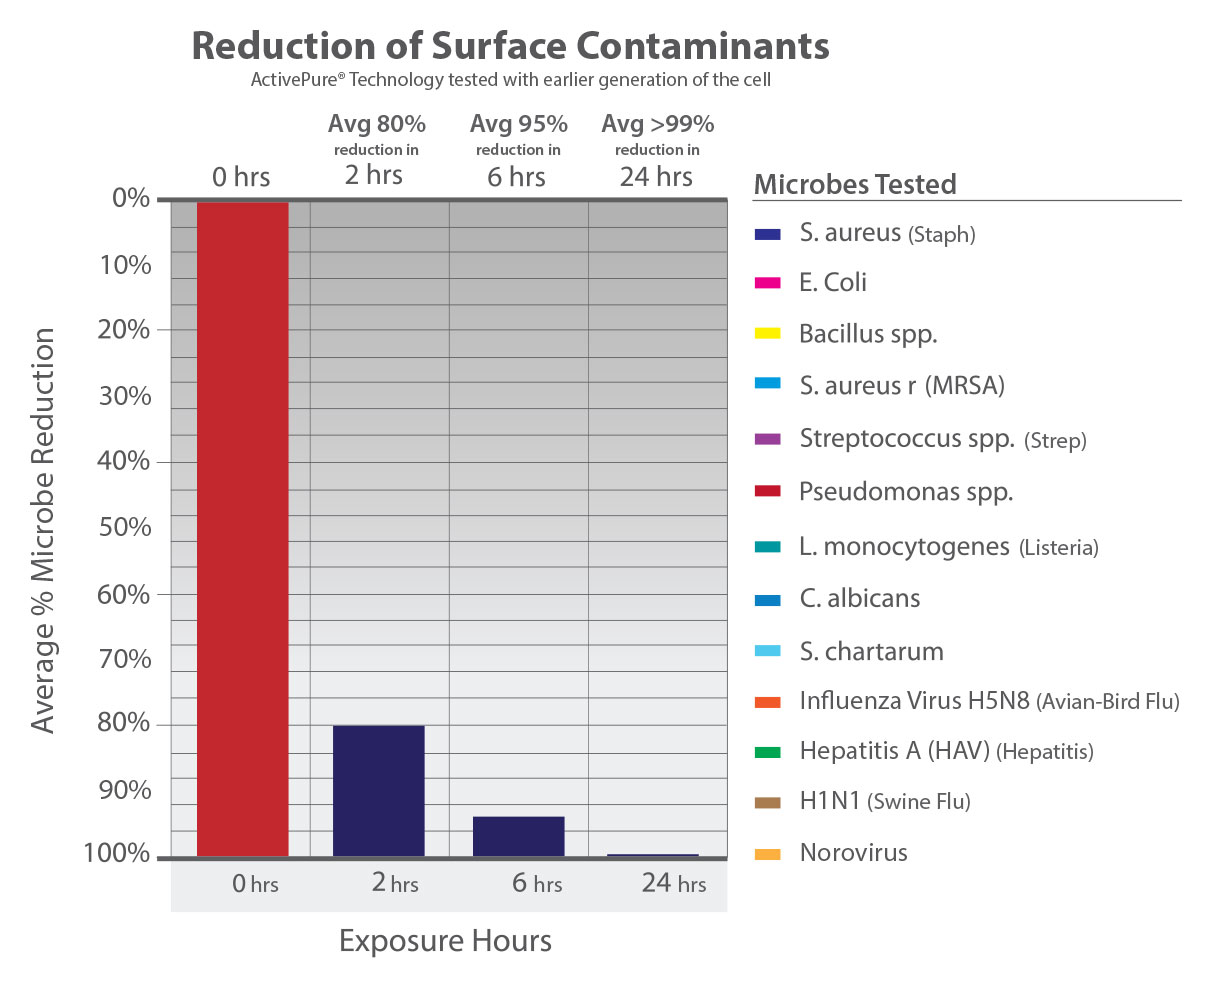 Reduction of Surface Contaminants